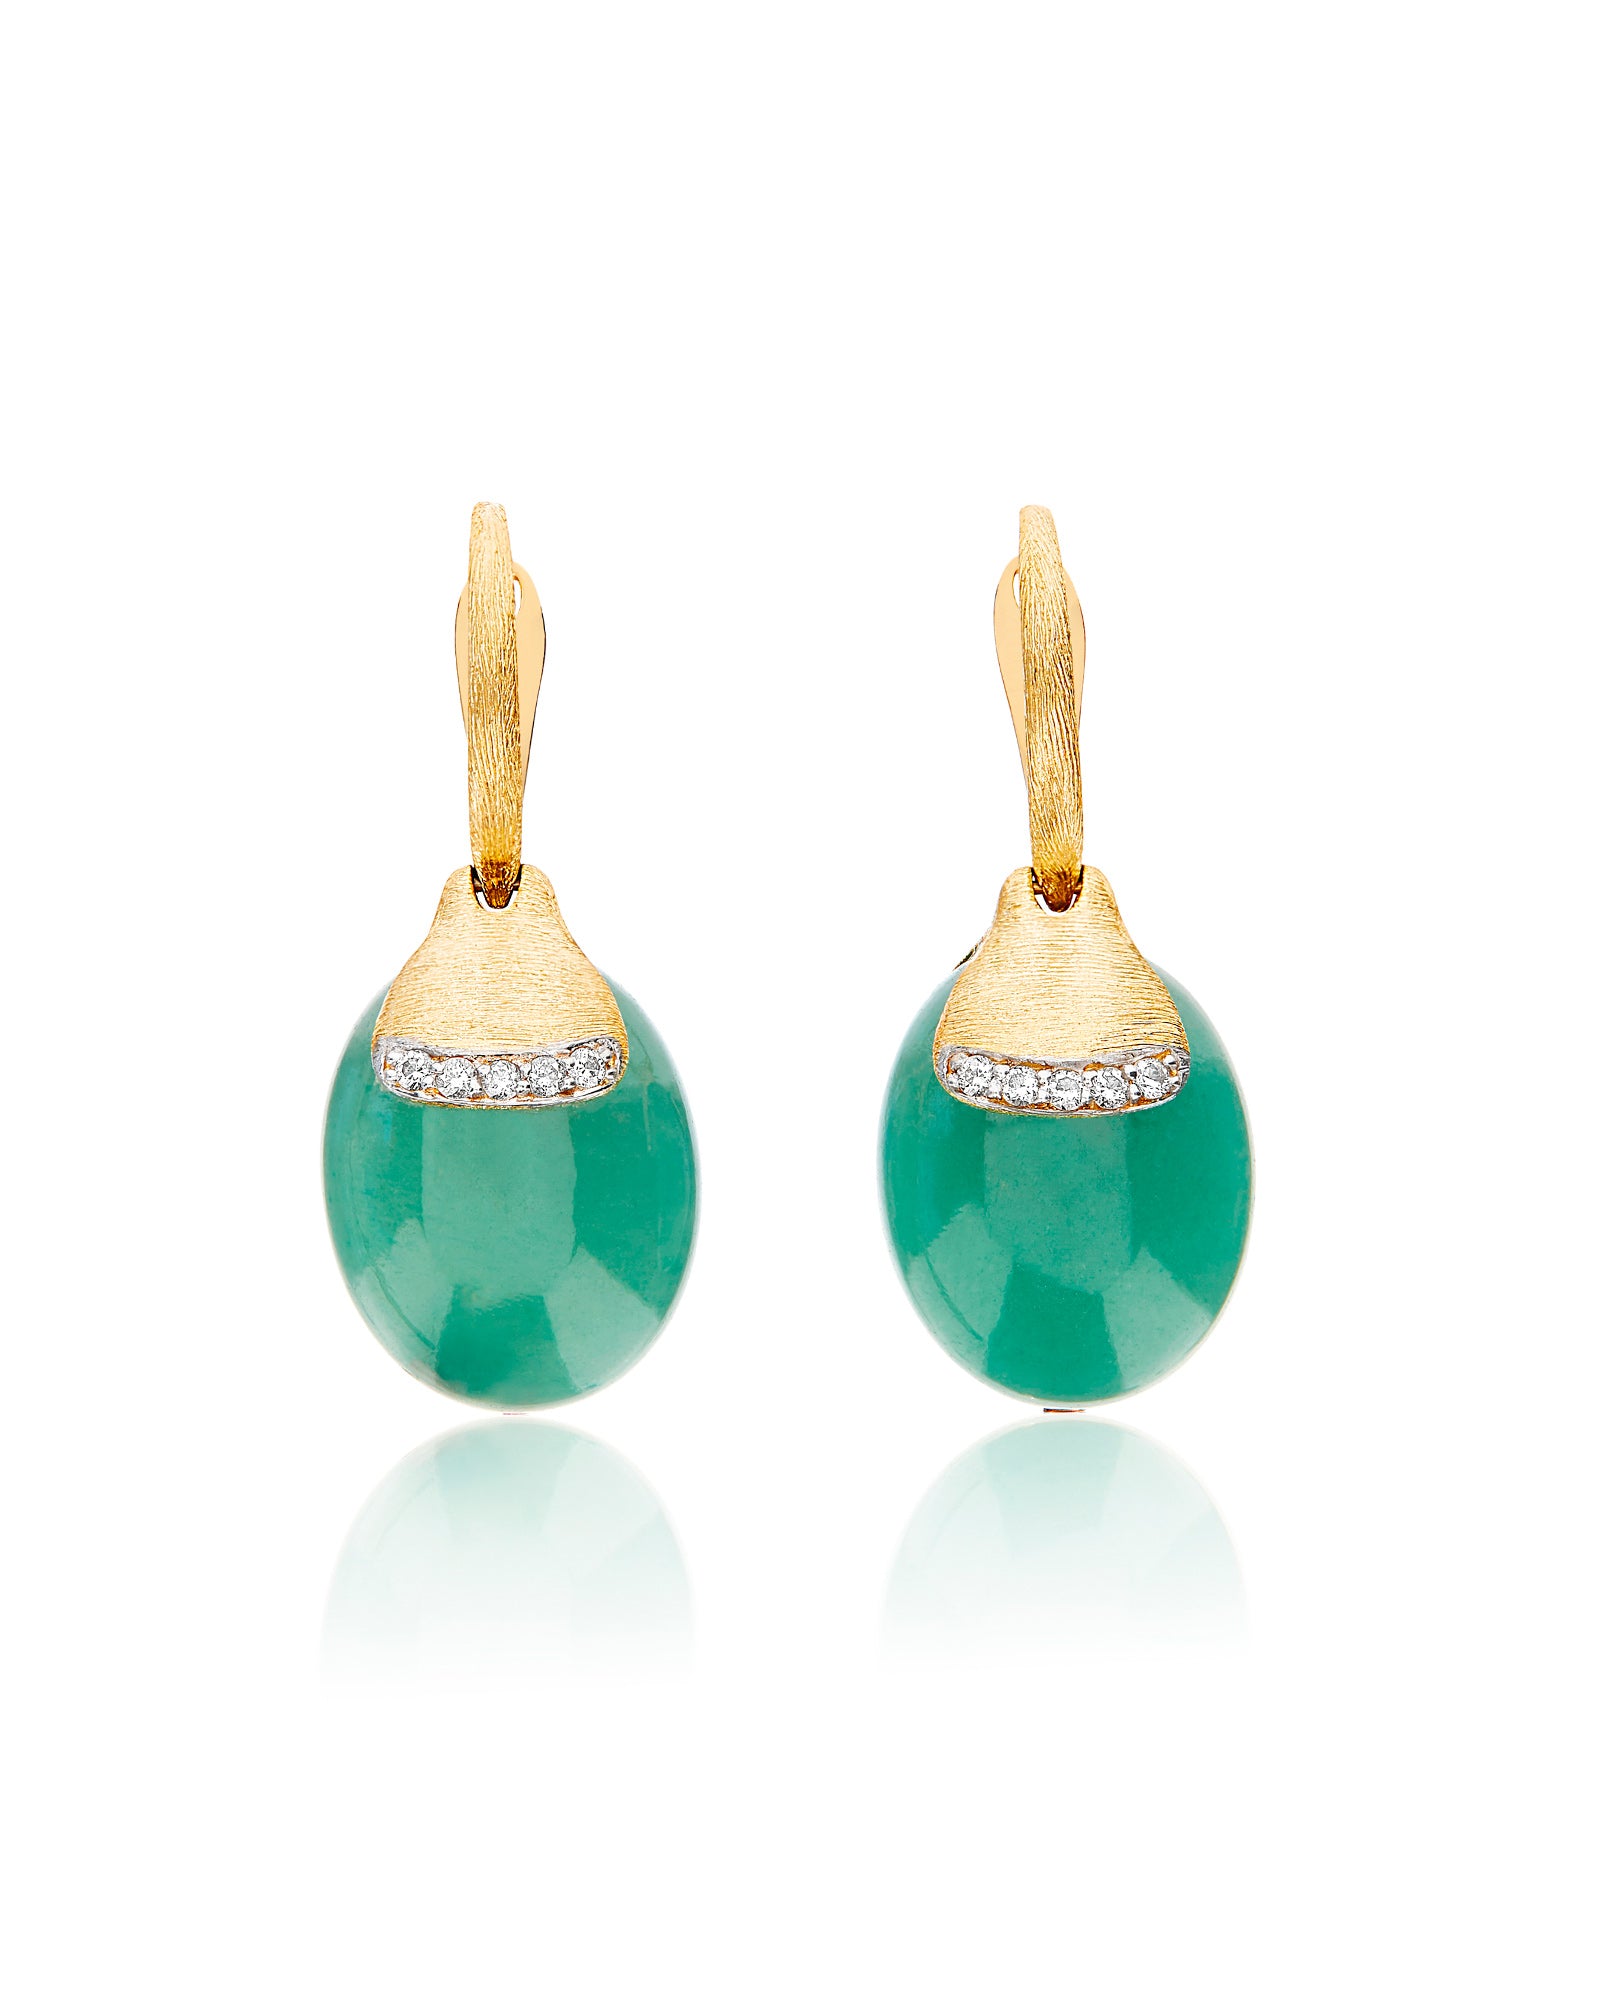 Amazonia "Amulets" Ciliegine Gold and Green Aventurine Ball Drop Earrings with Diamonds Details (LARGE)